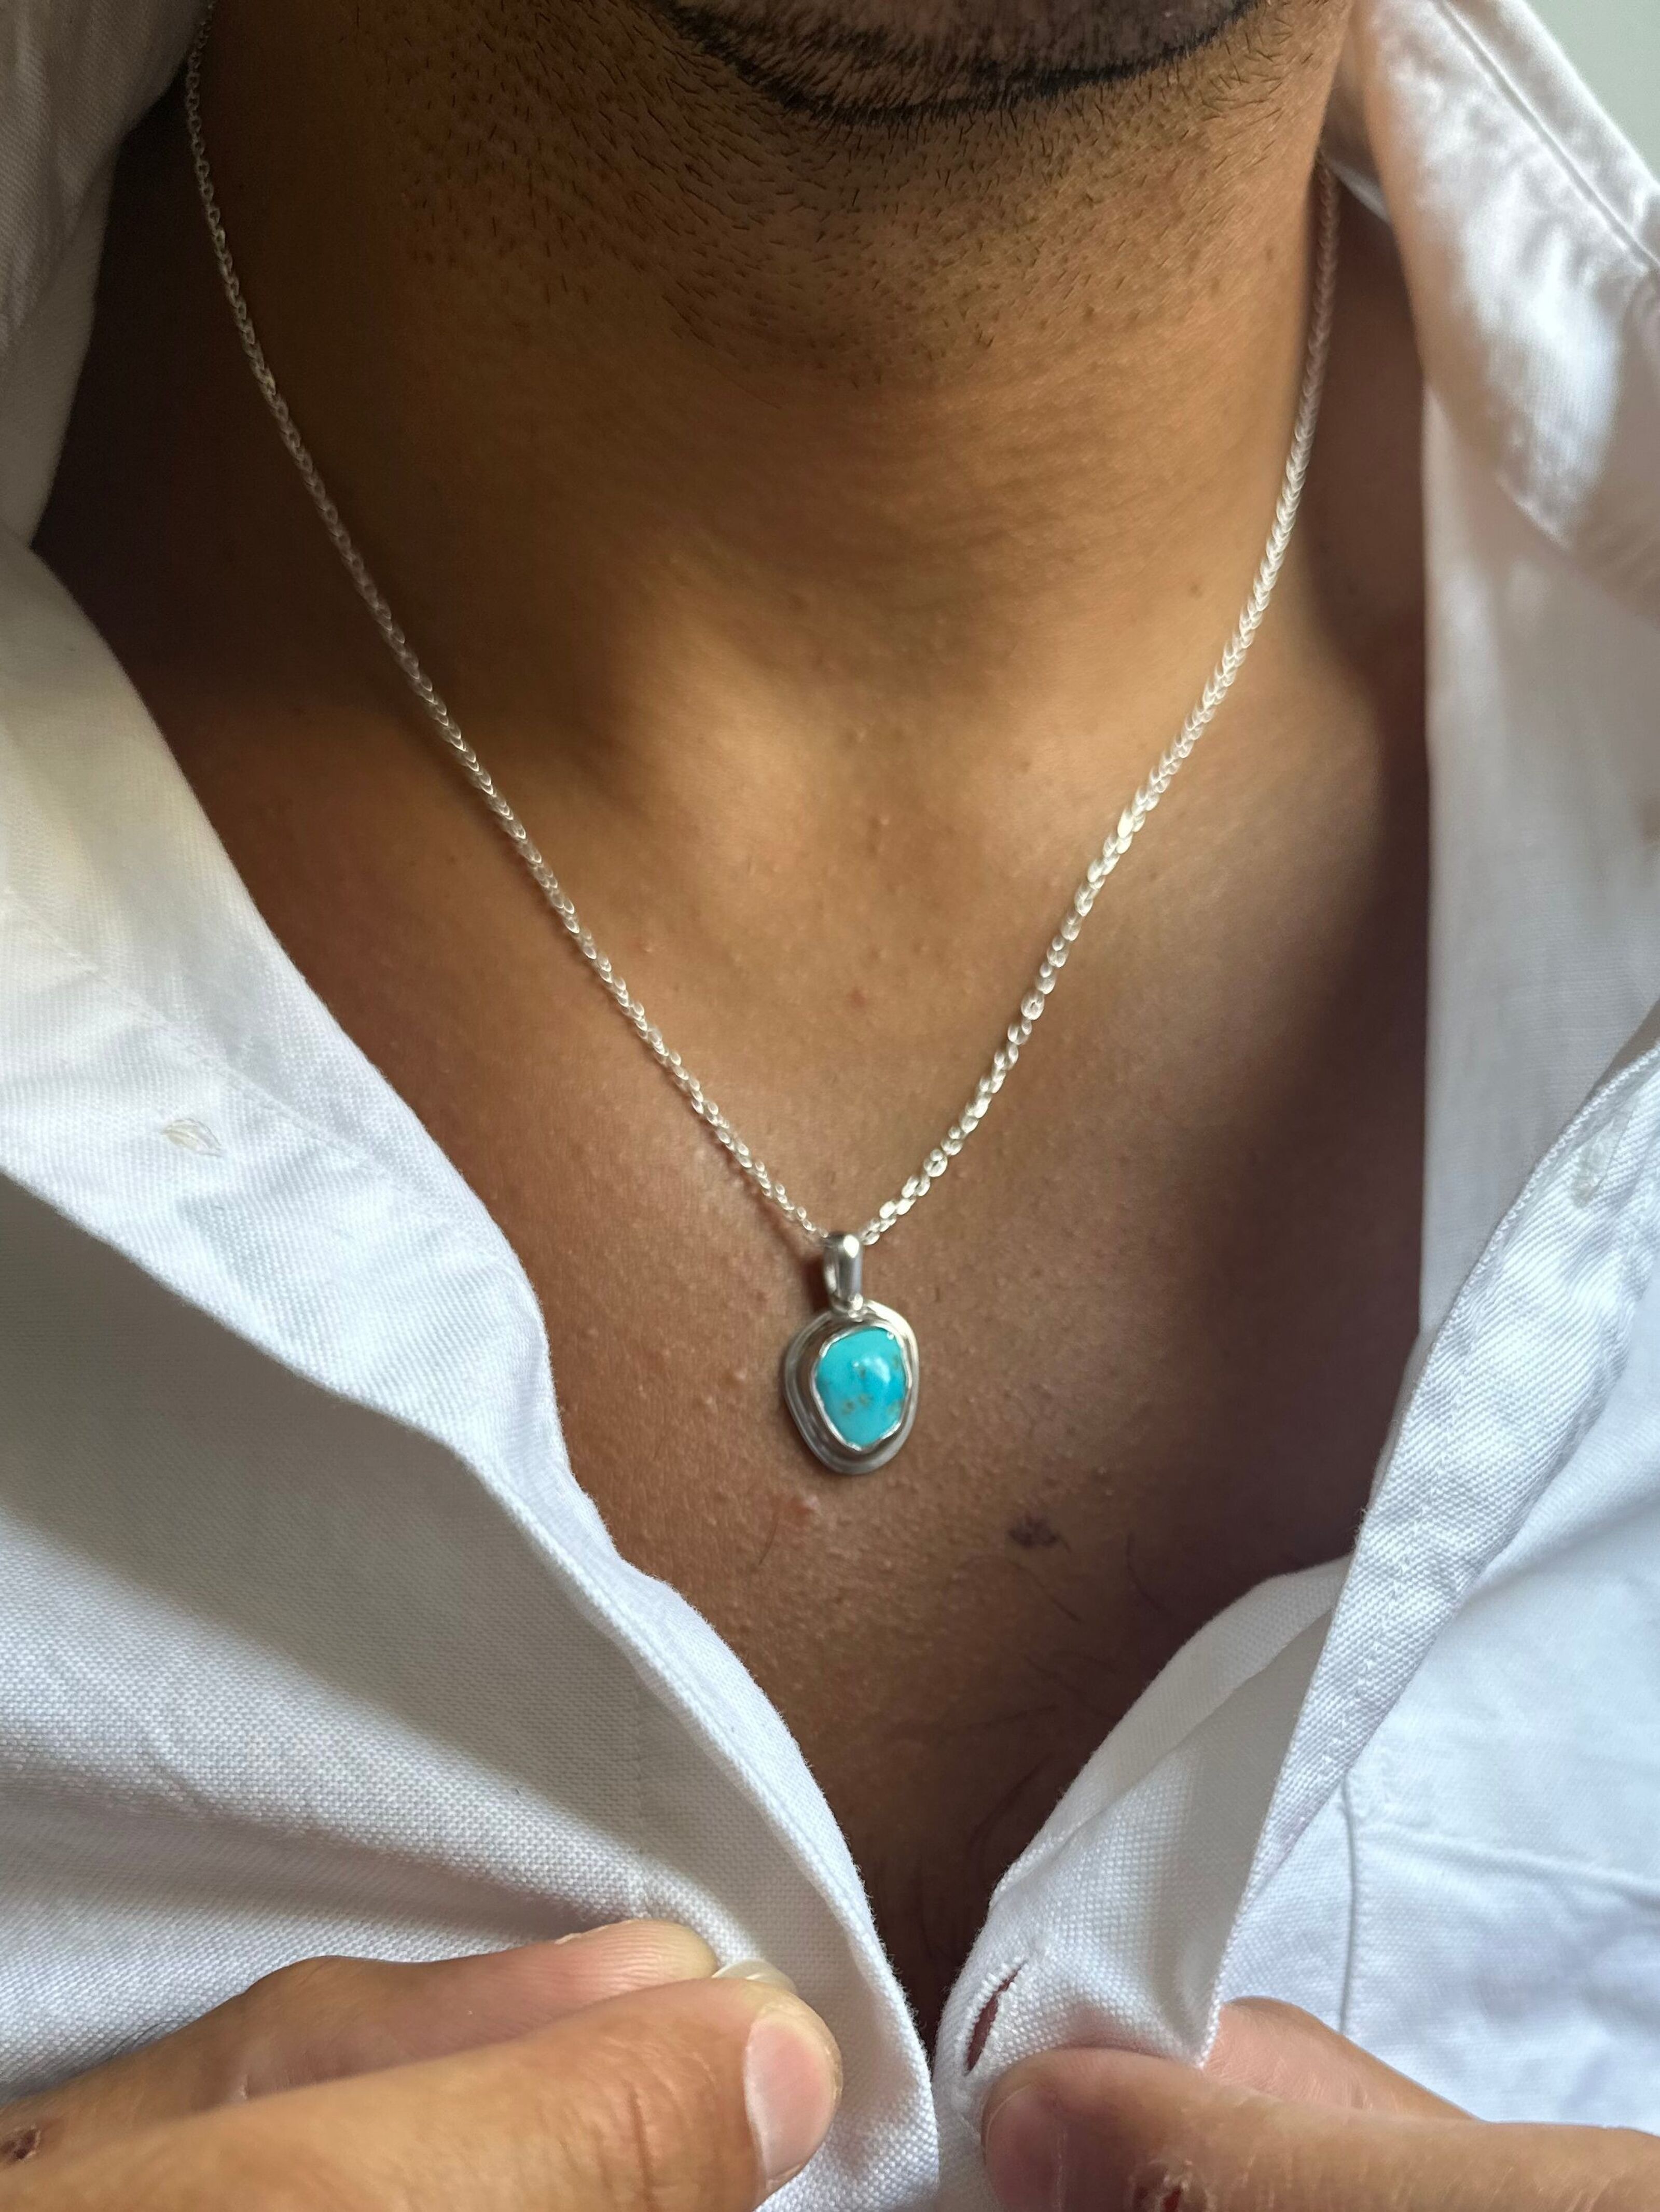 Buy wholesale Real Turquoise Stone Necklace Men, Turquoise Pendant Men,  Silver Chain Necklace, Men's Pendant, Made from Sterling SIlver